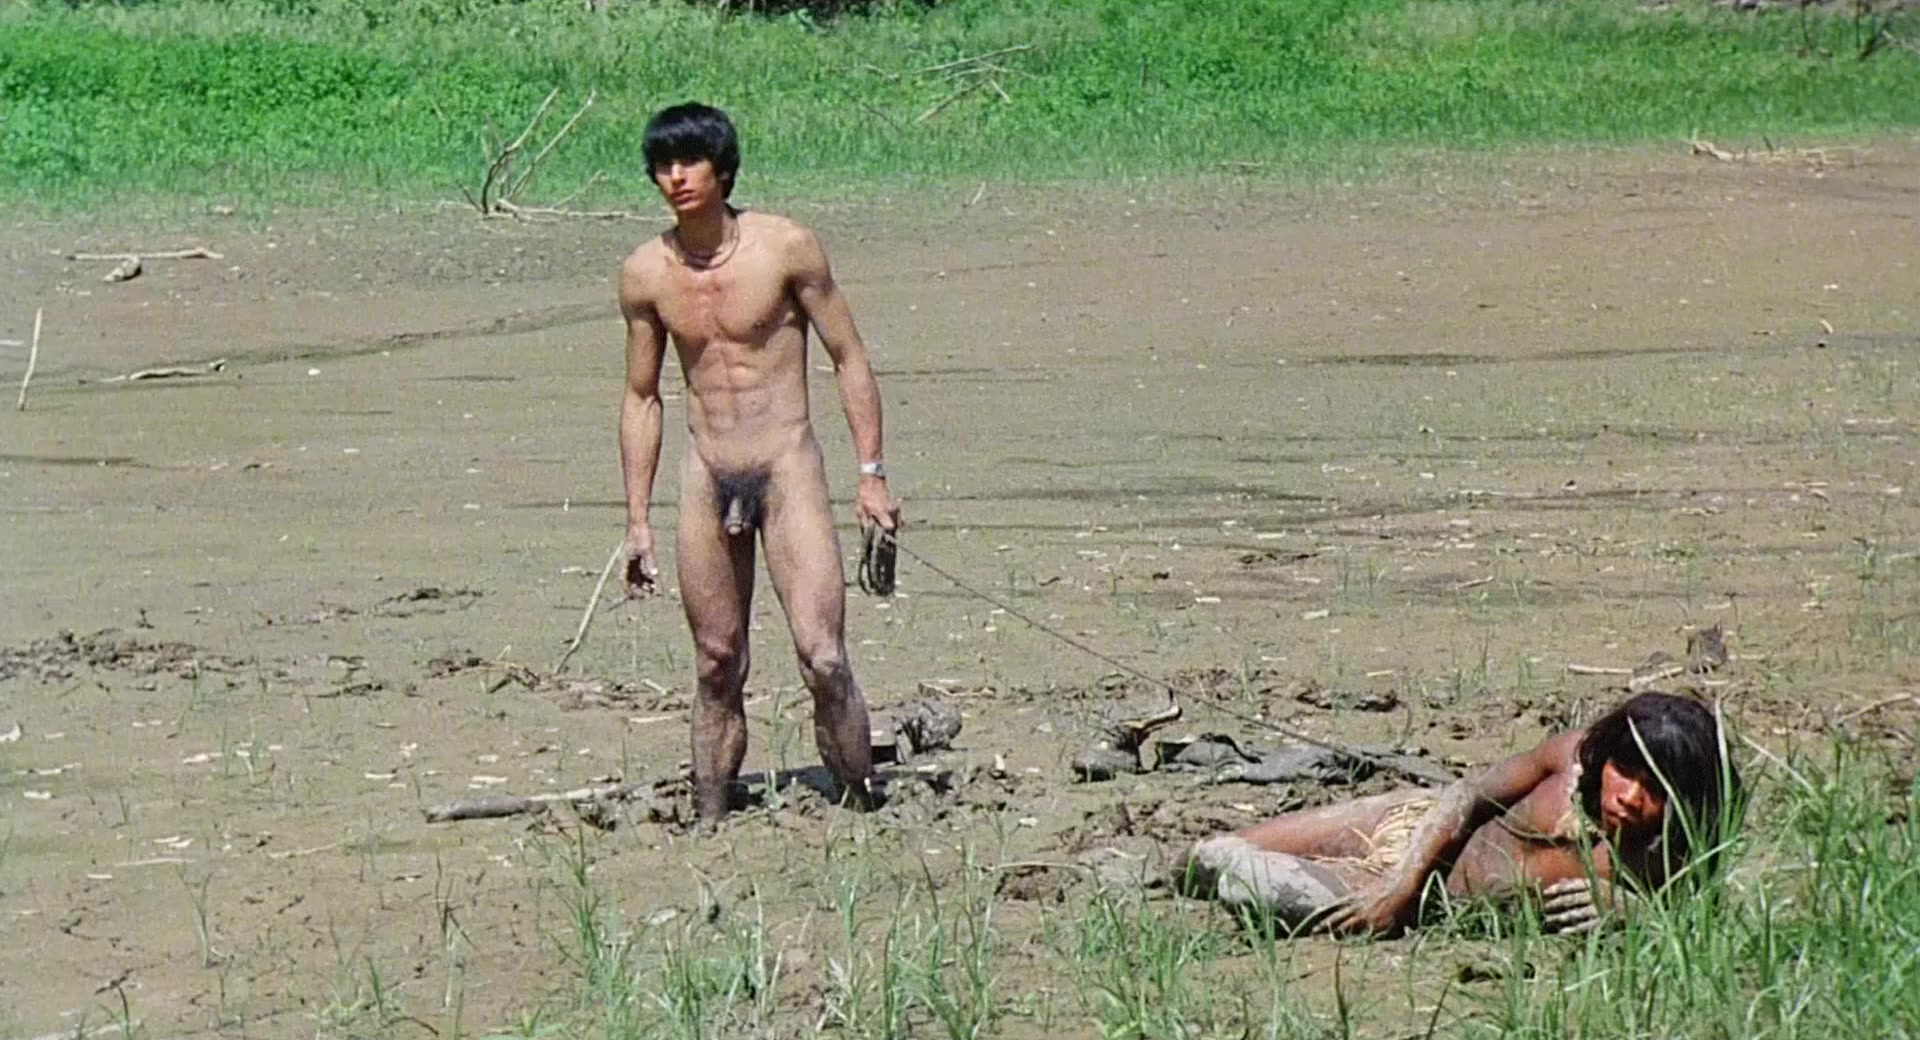 OMG, he’s naked RETRO EDITION: Ricardo Fuentes in CANNIBAL HOLOCAUST.